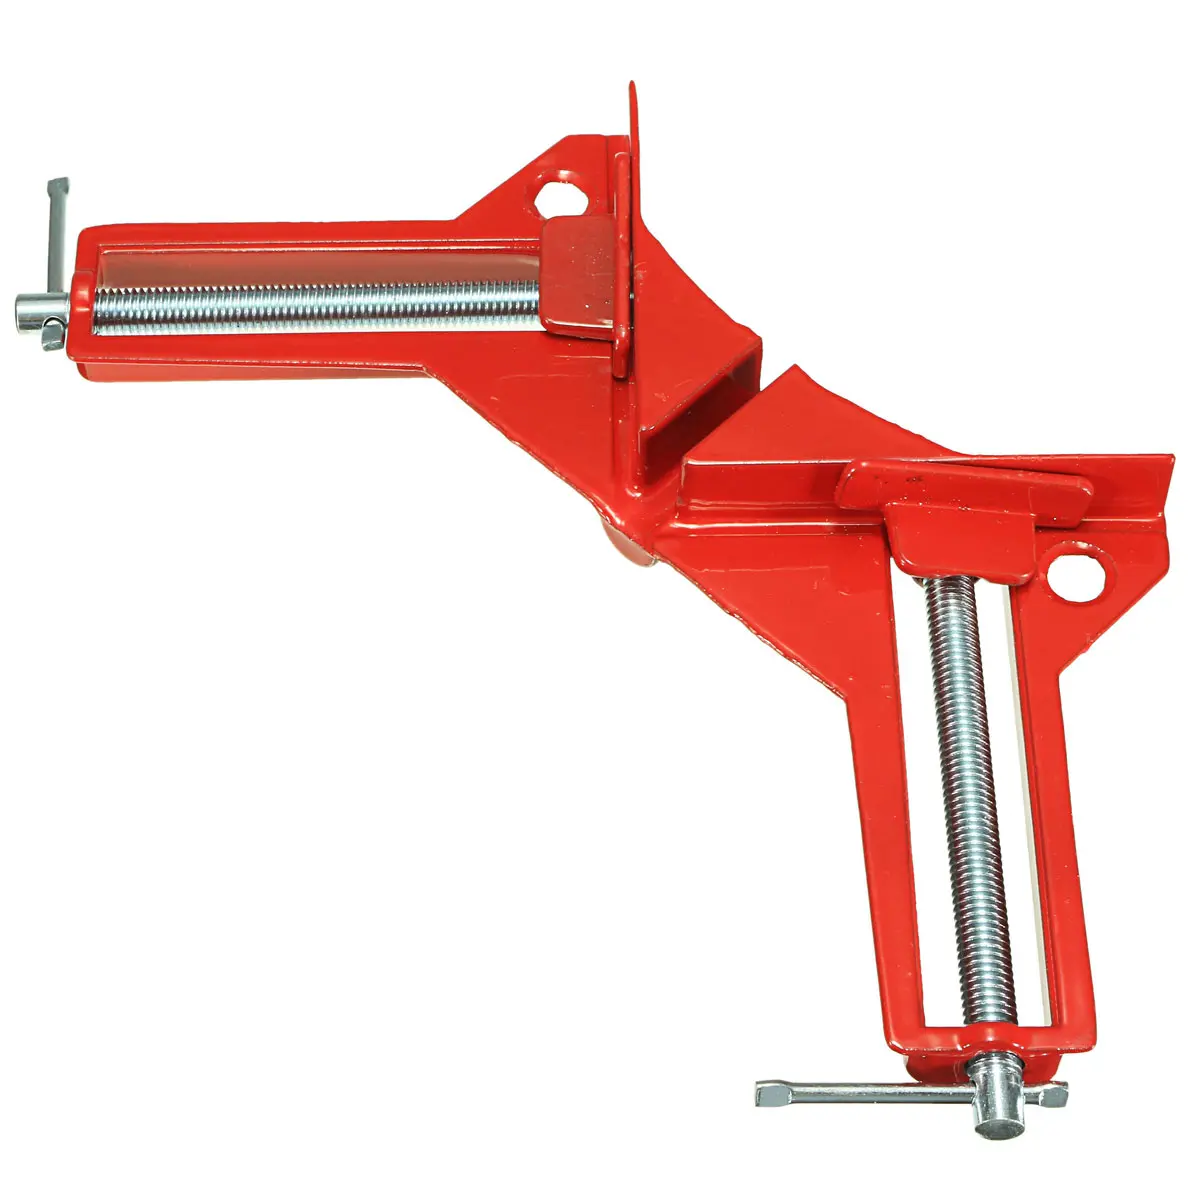 Raitool™ Multifunction Right Angle Clip 90 Degree Clamps Corner Holder Wood Working Tool